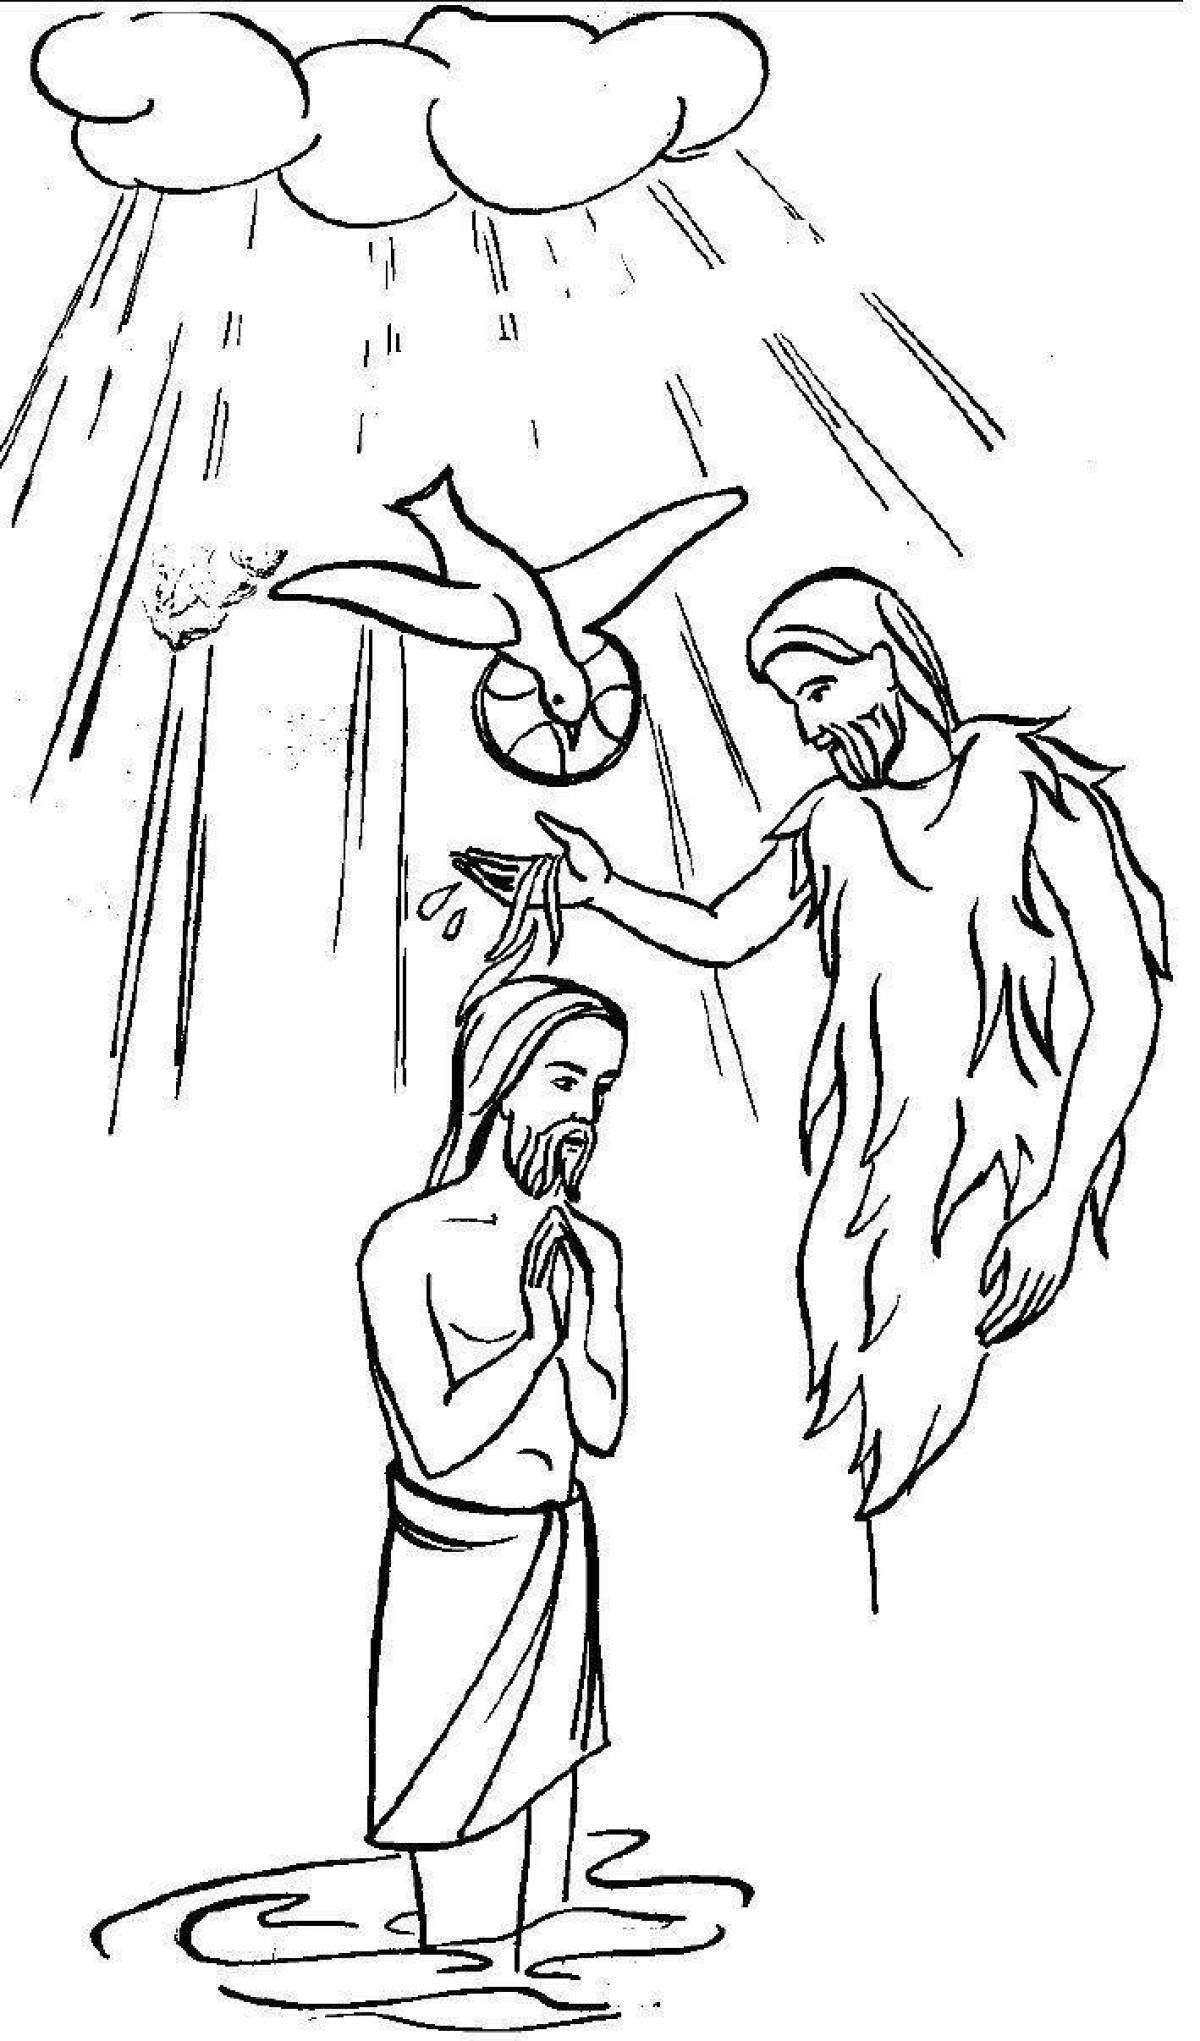 On the topic of the Baptism of the Lord #2